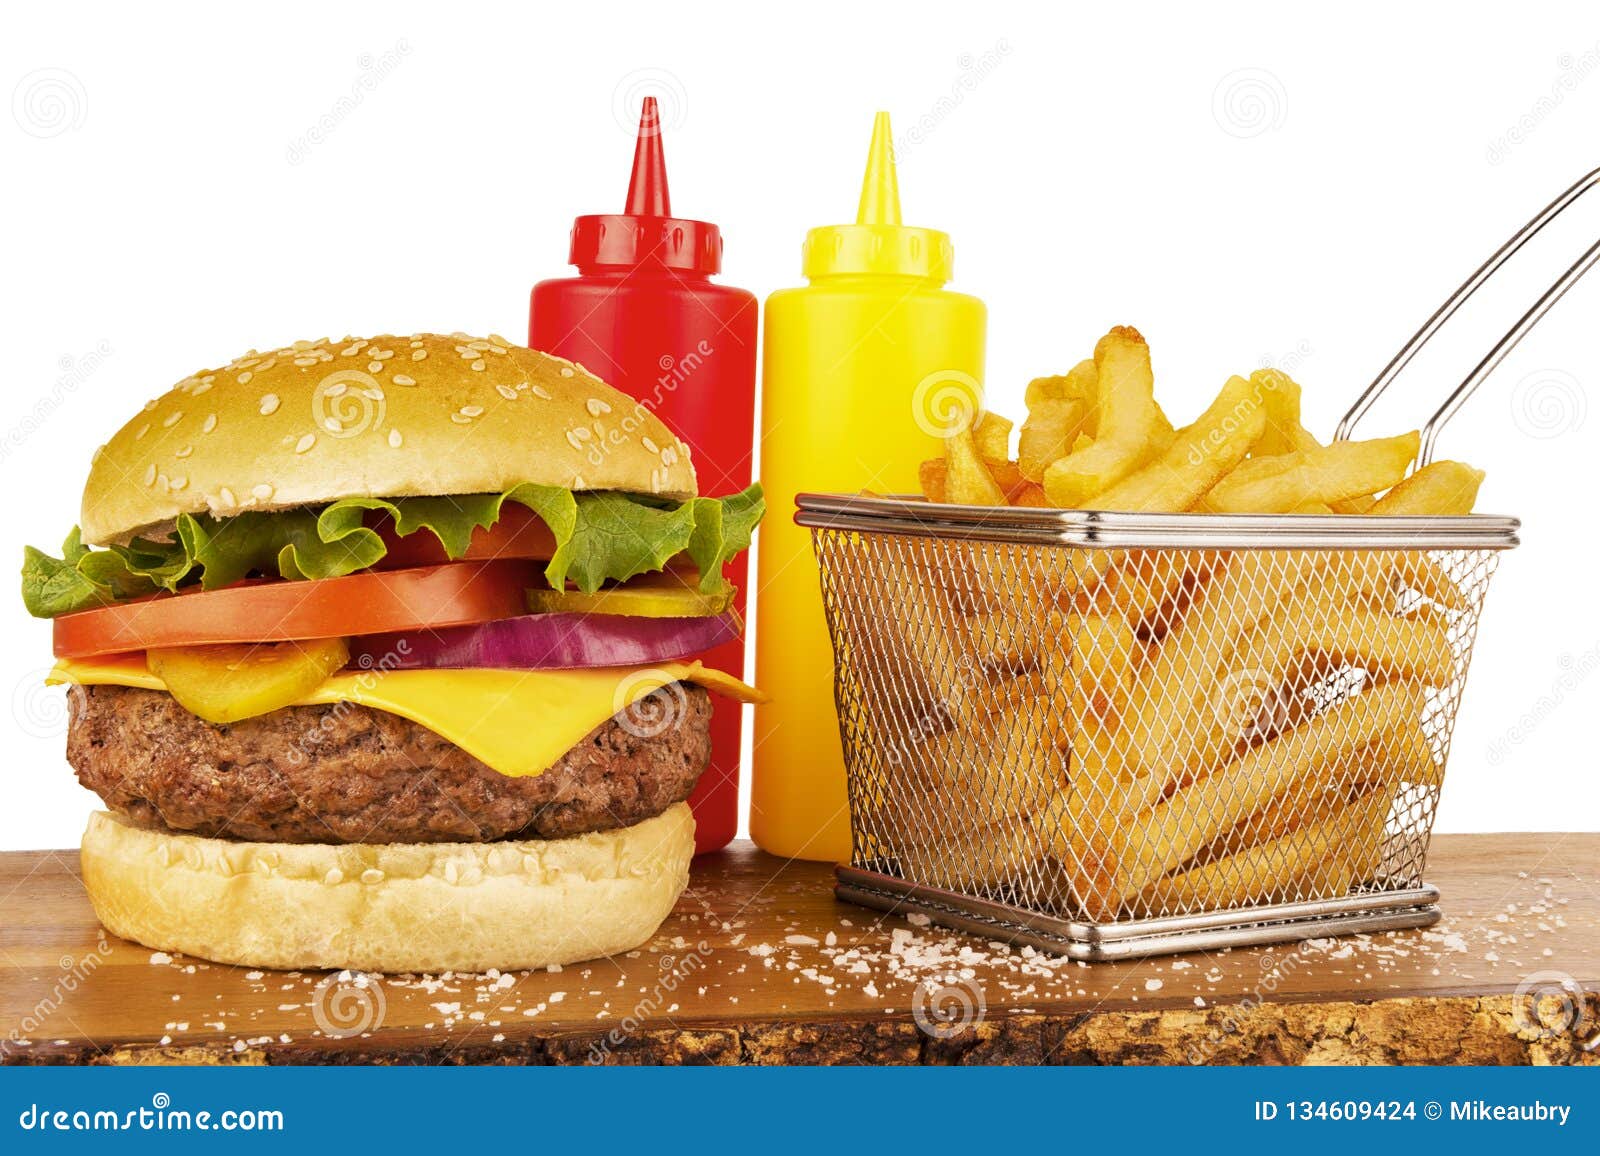 Cheeseburger With French Fries Basket Ketchup And Mustard Bottles